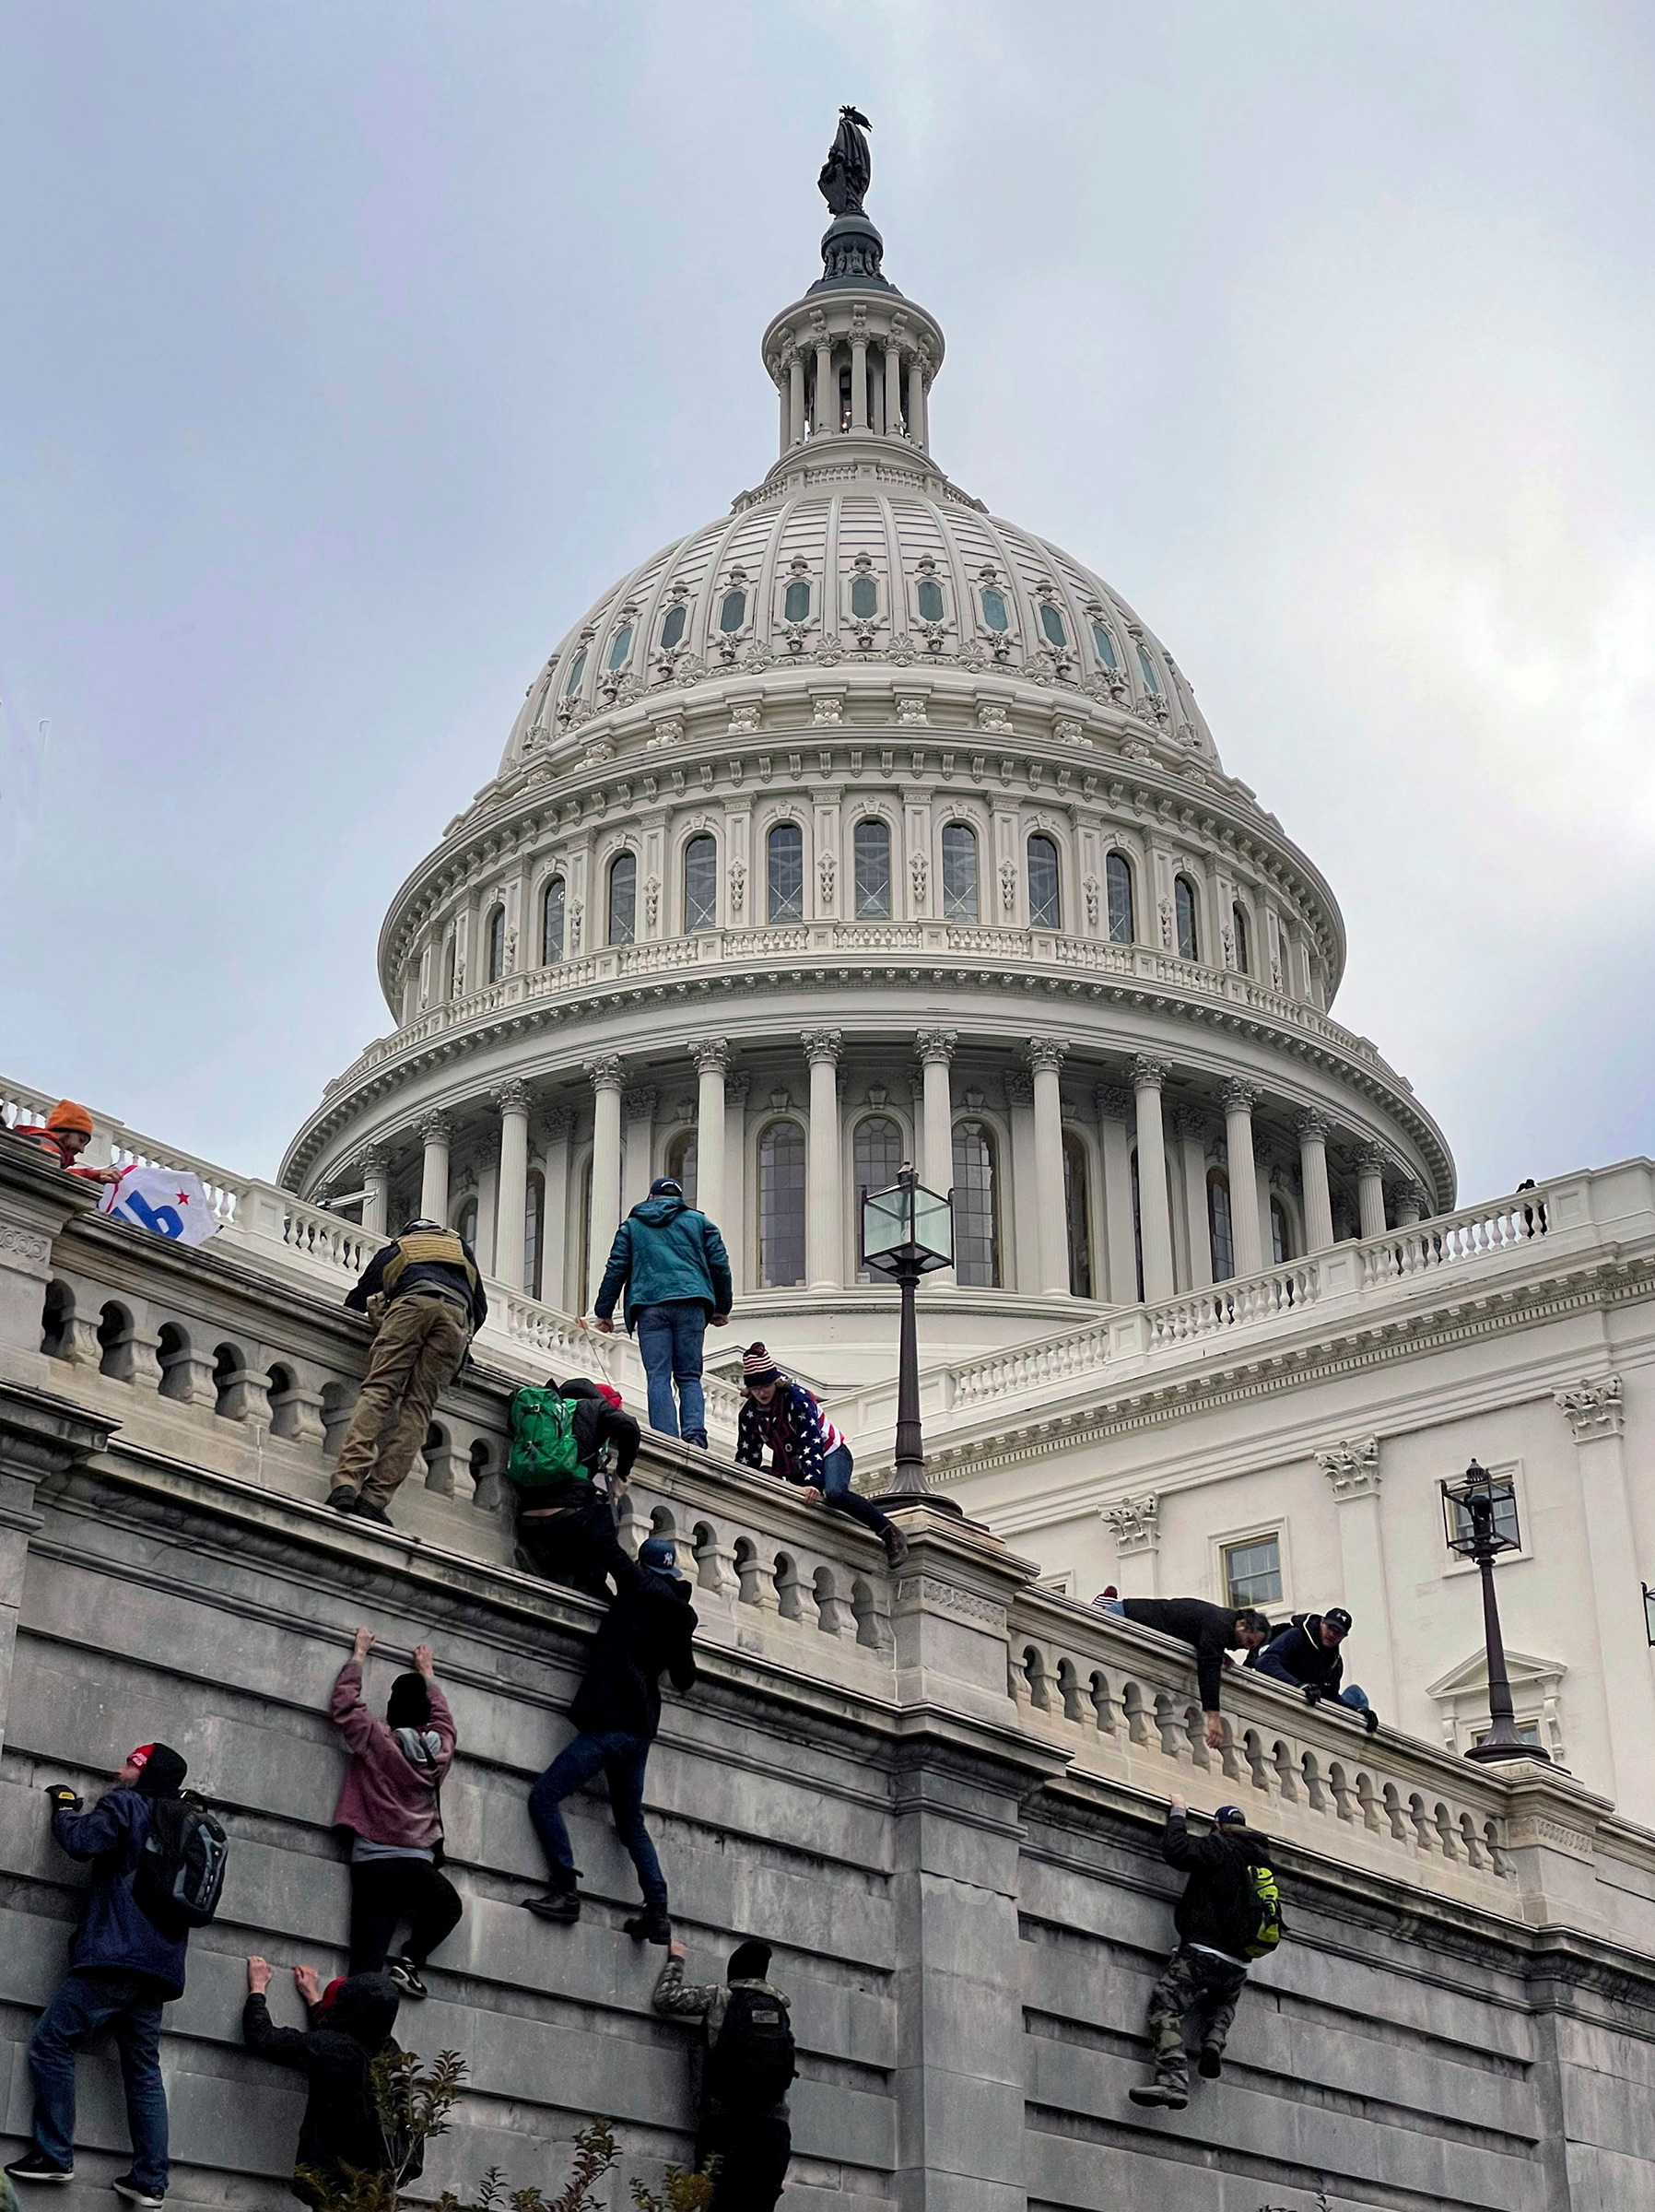 On Jan 6, The United States Capitol Building in Washington, D.C. was breached by thousands of protesters during a "Stop The Steal" rally in support of President Donald Trump during the worldwide coronavirus pandemic. (zz/STRF/STAR MAX/IPx—AP)